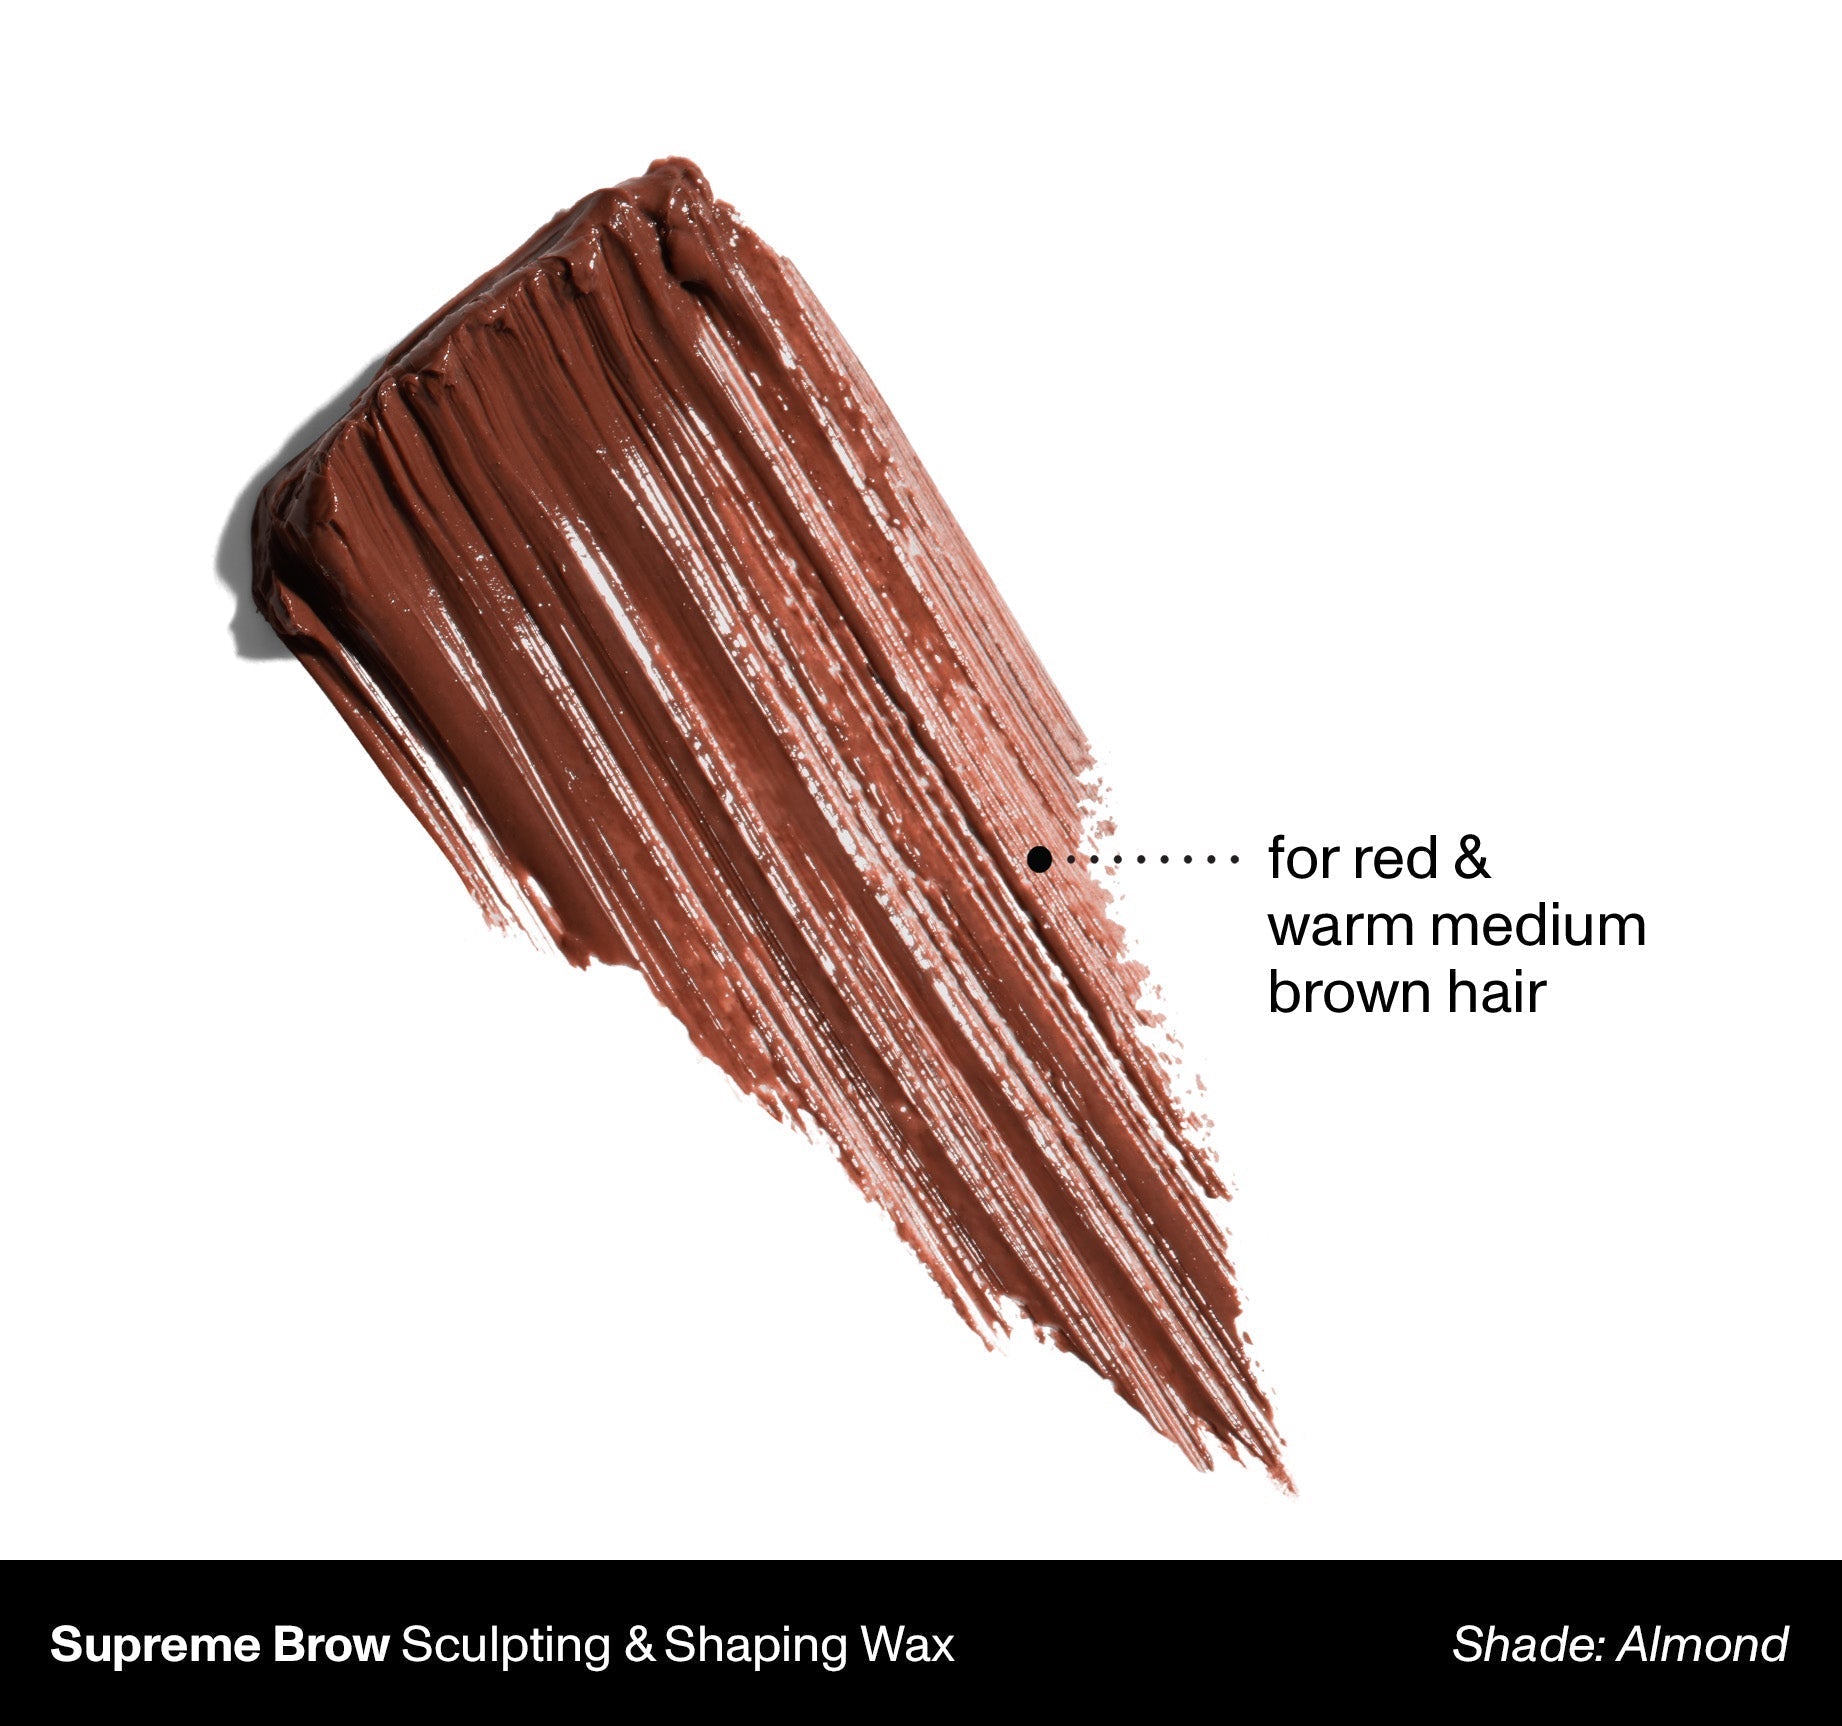 Supreme Brow Sculpting And Shaping Wax - Almond - Image 2